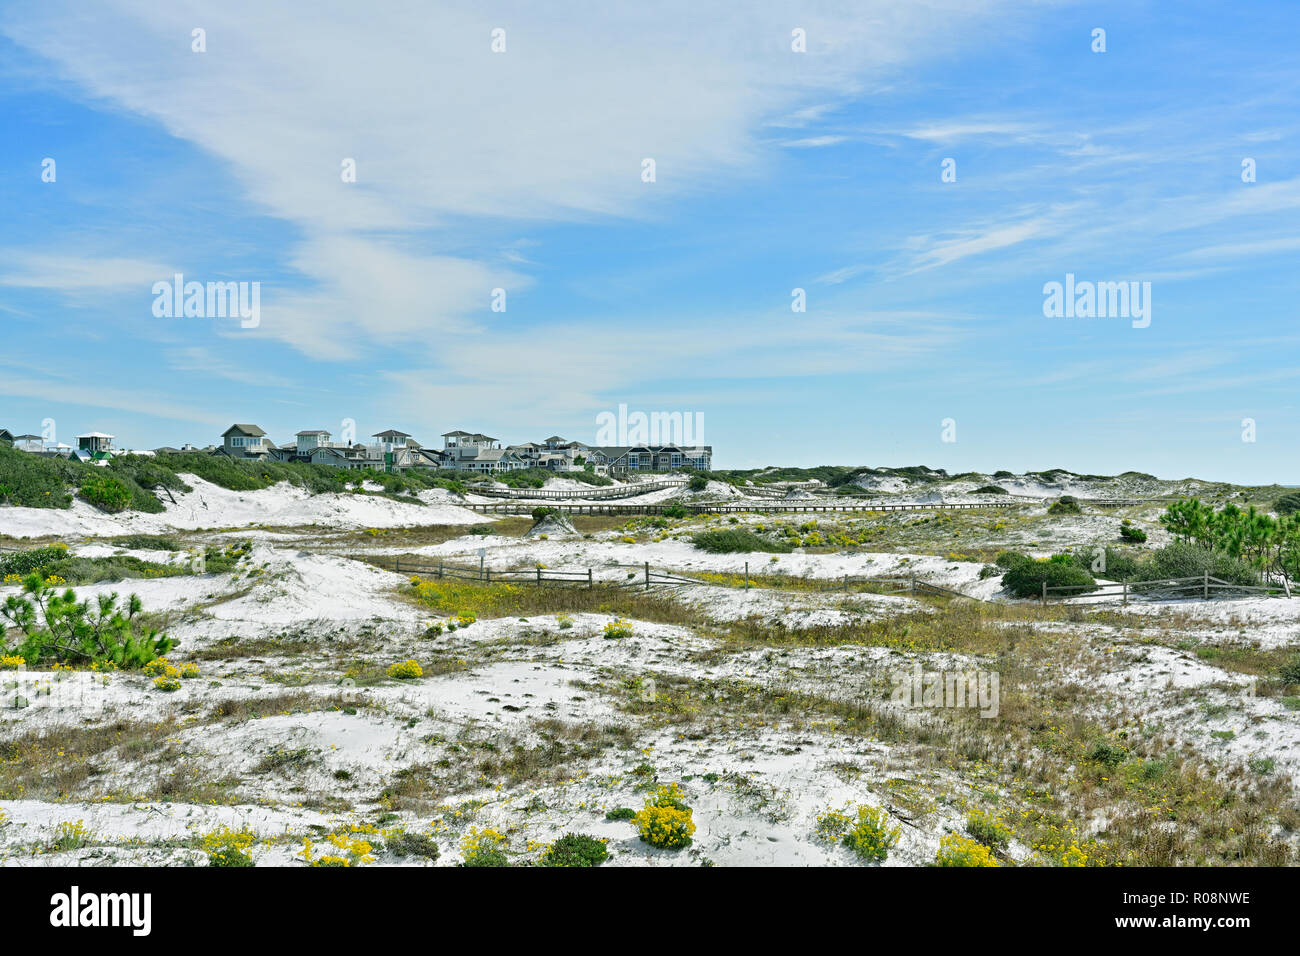 Florida coastal sand dunes landscape looking toward Watersound a coastal living community in the panhandle or Gulf coast of Florida, USA. Stock Photo